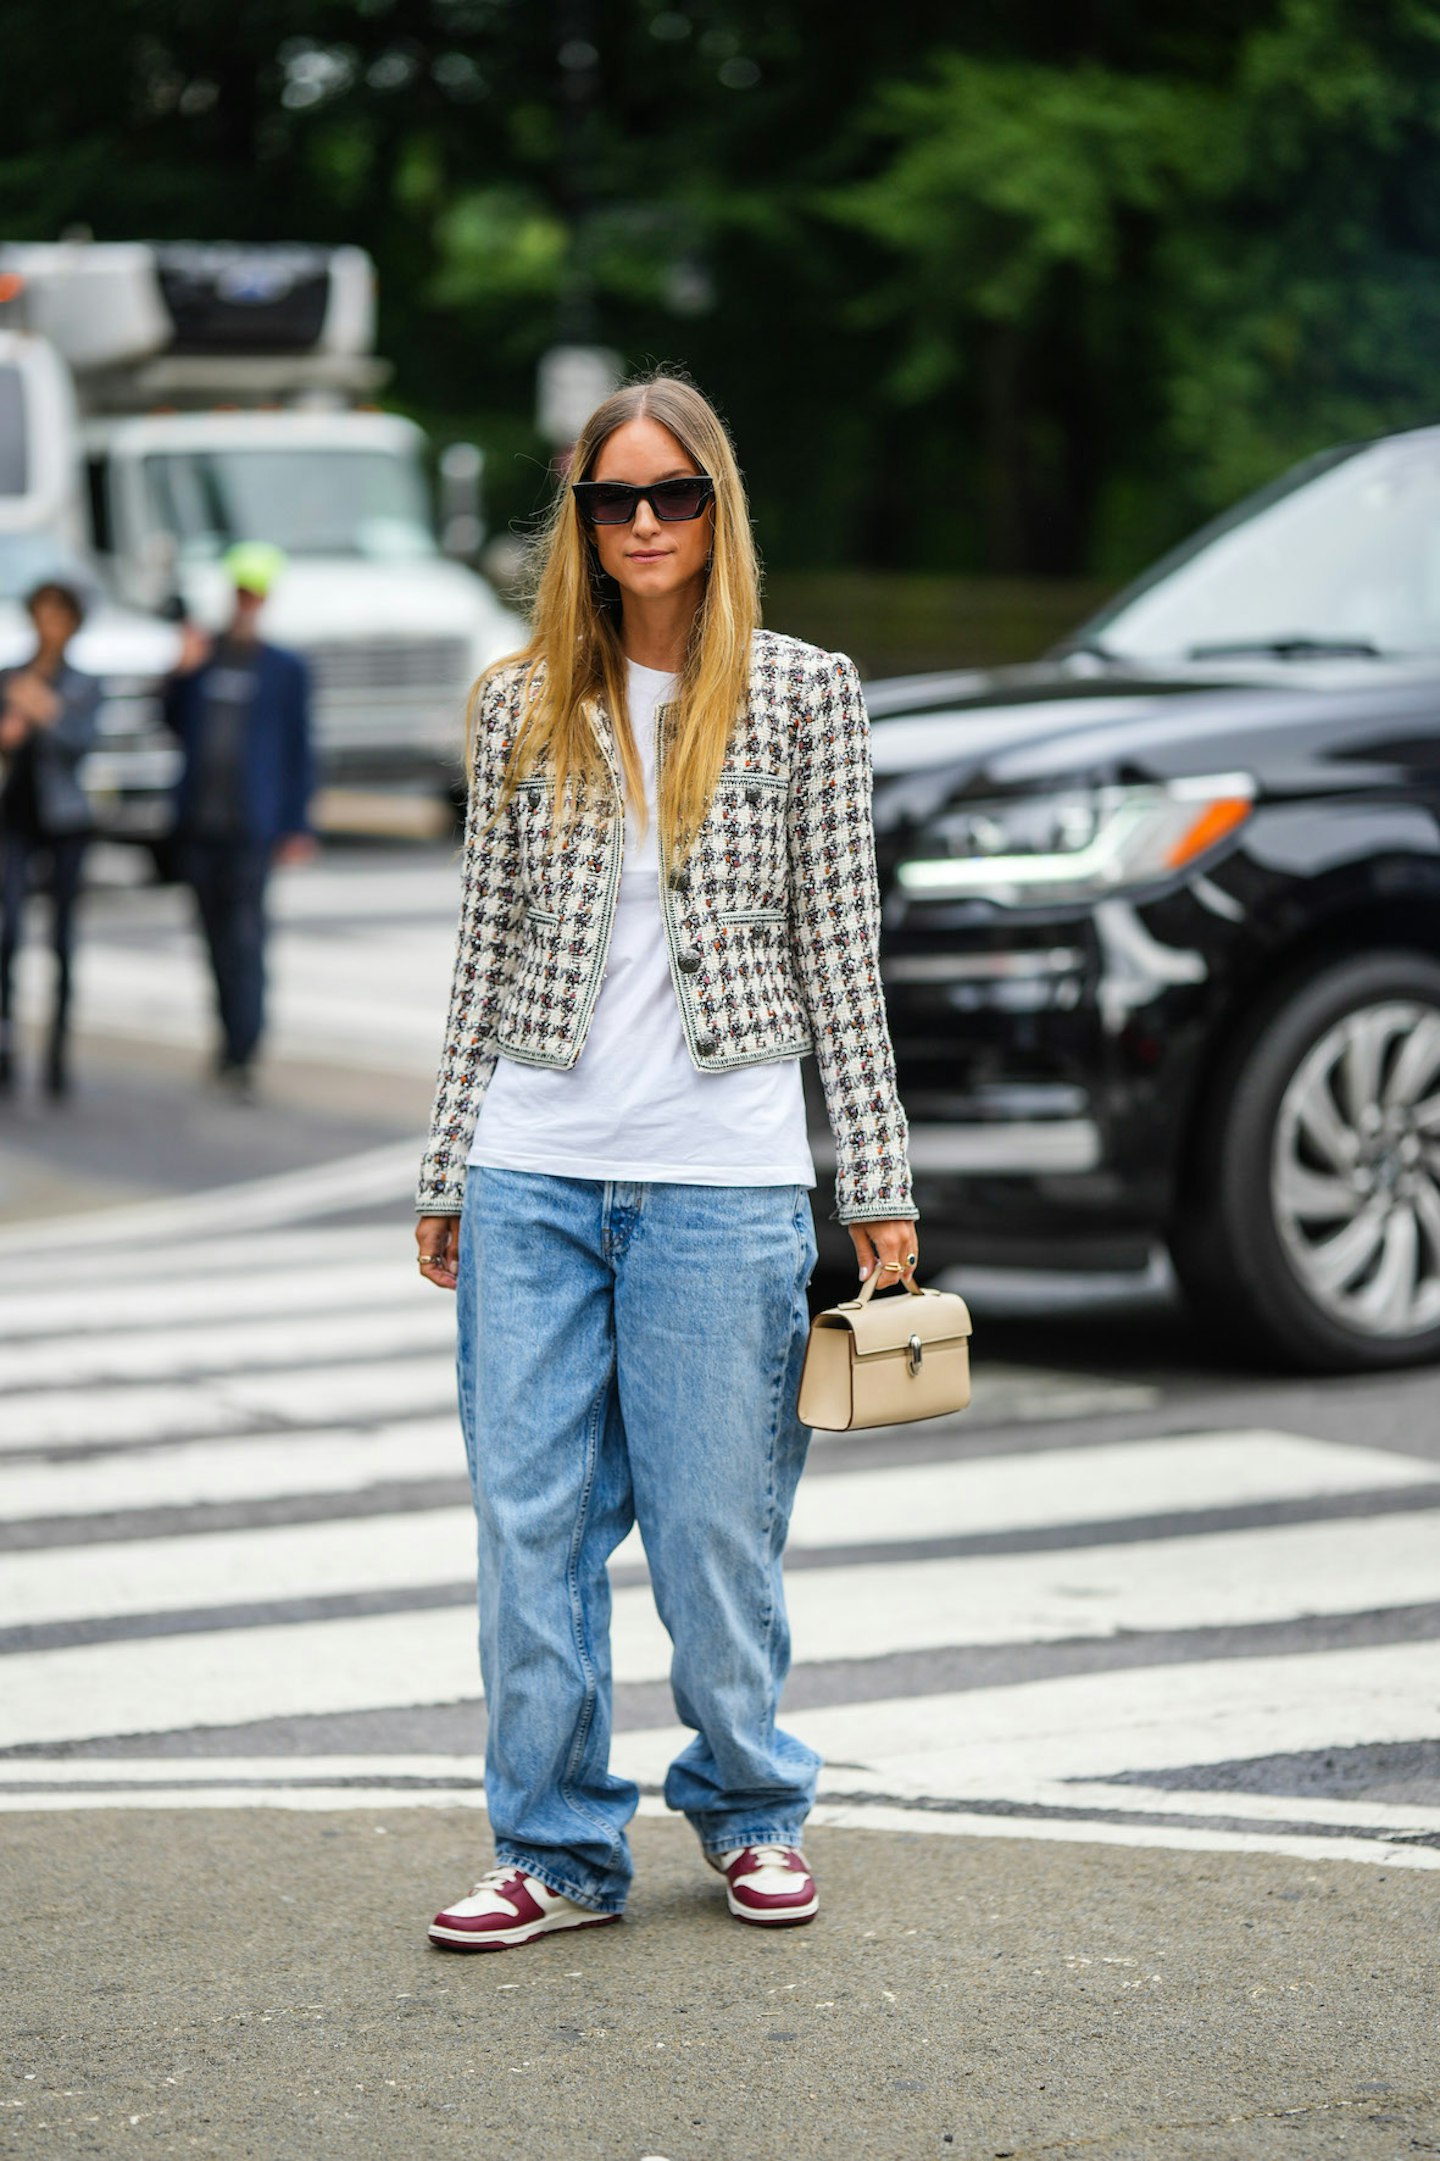 15 Best Baggy Jeans Outfit Ideas: How to Style Loose-Fit Denim